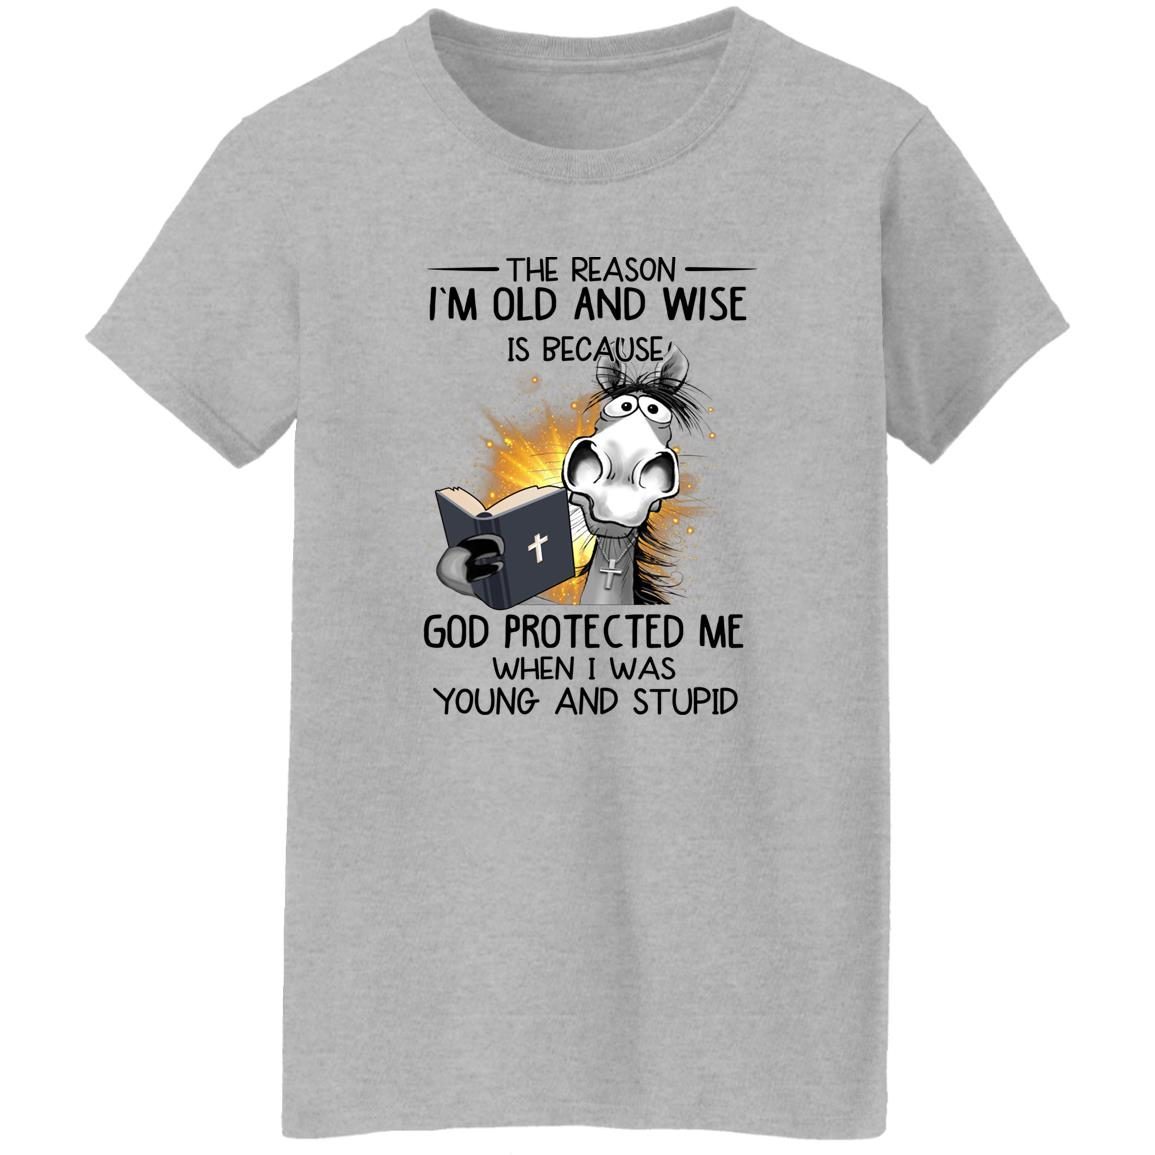 Horse The Reason I’m Old And Wise Is Because God Protected Me When I Was Young And Stupid shirt